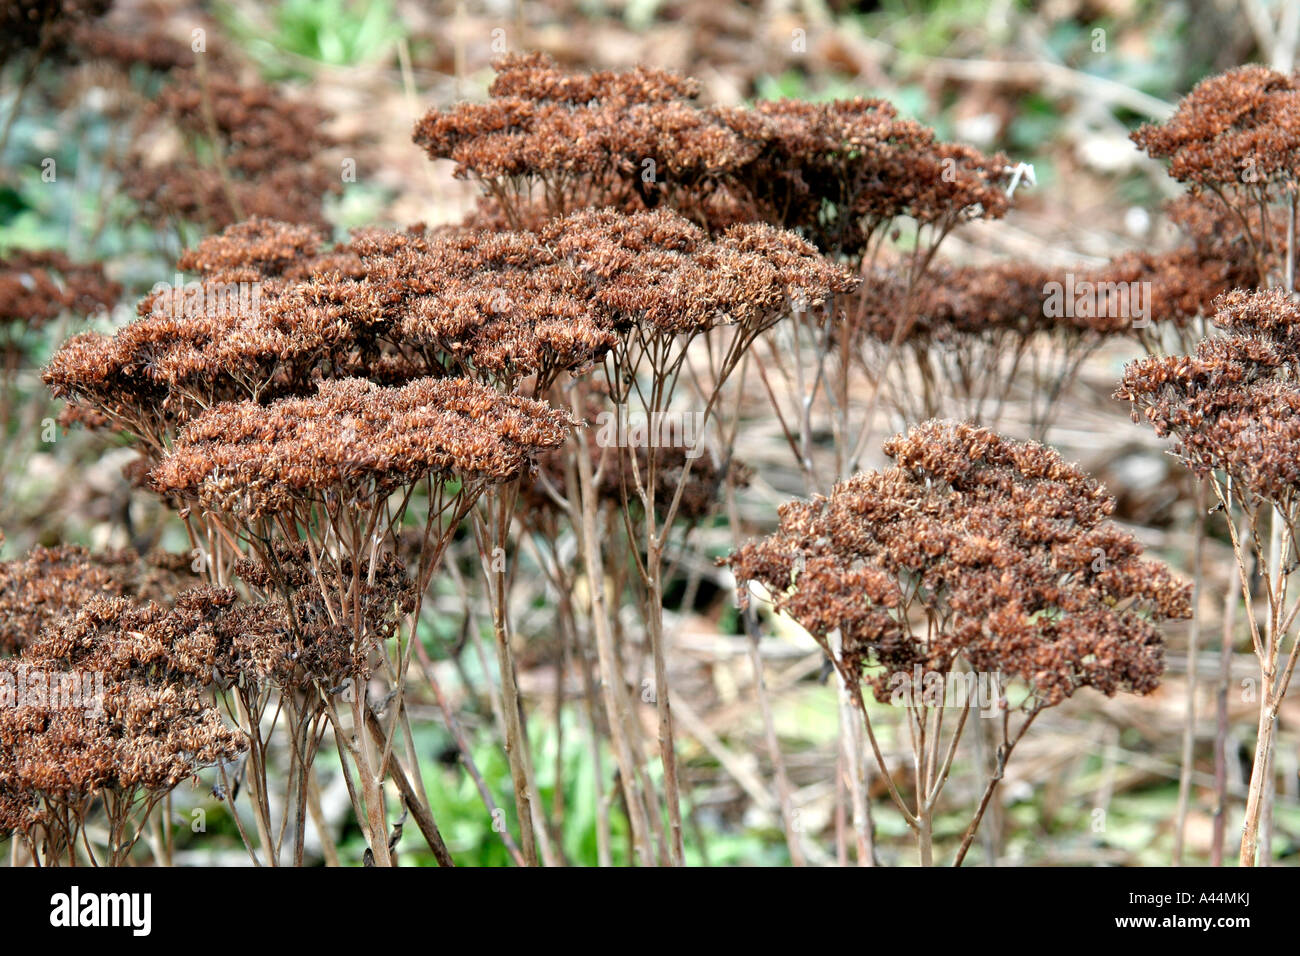 Sedum Herbstfreude gives great structure and interest all winter long taken 7 Feb Stock Photo